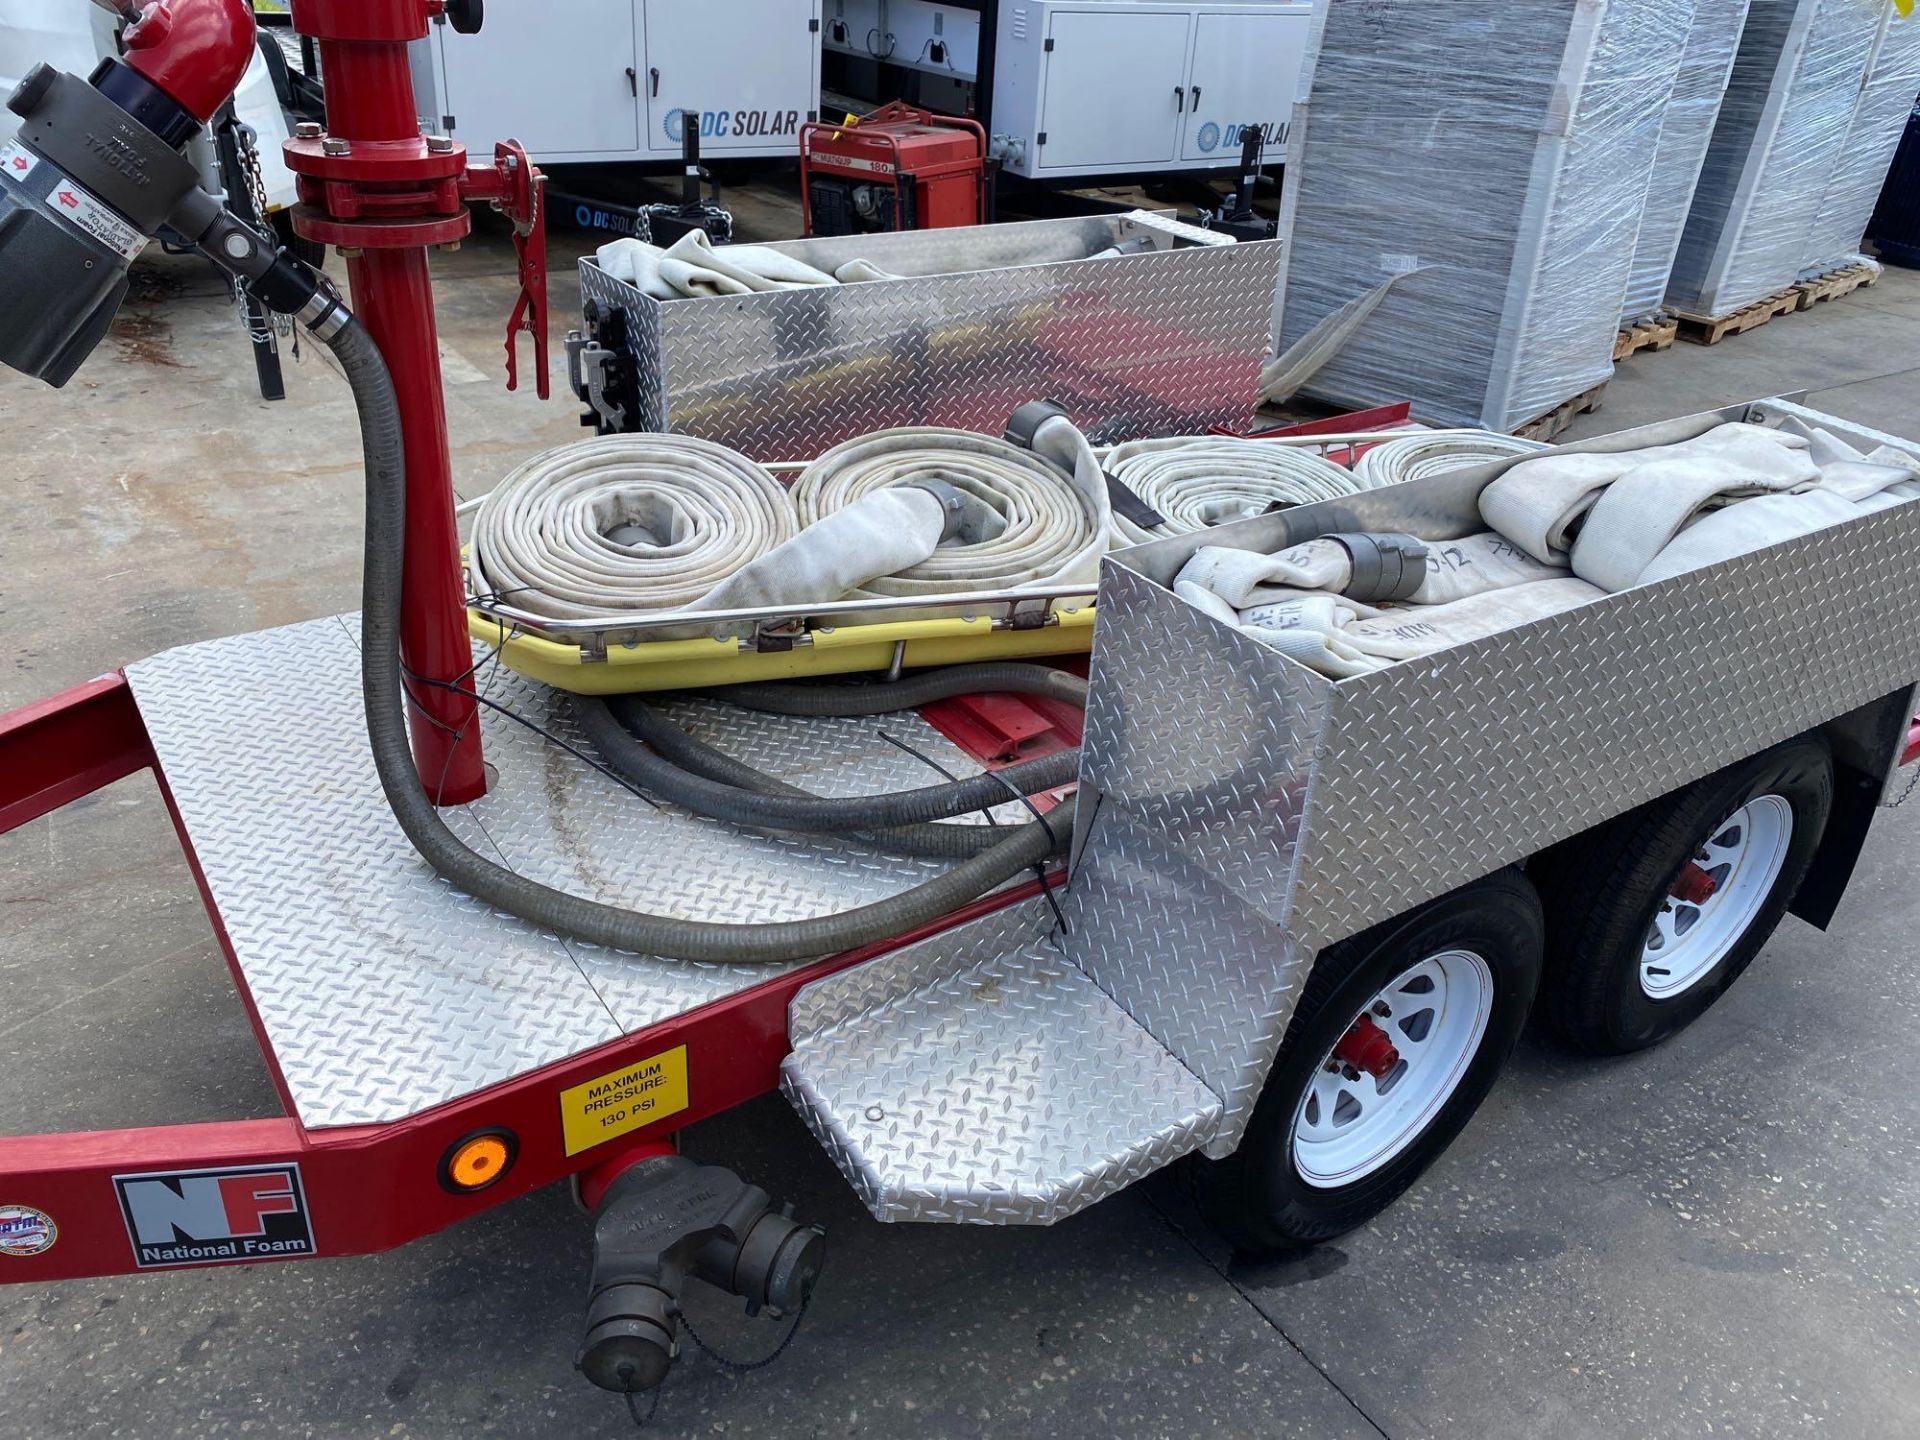 MGS INC. FIRE SUPPORT TRAILER WITH HOSES, STRETCHER, NATIONAL FOAM NOZZLE/ATTACHMENT - Image 16 of 28